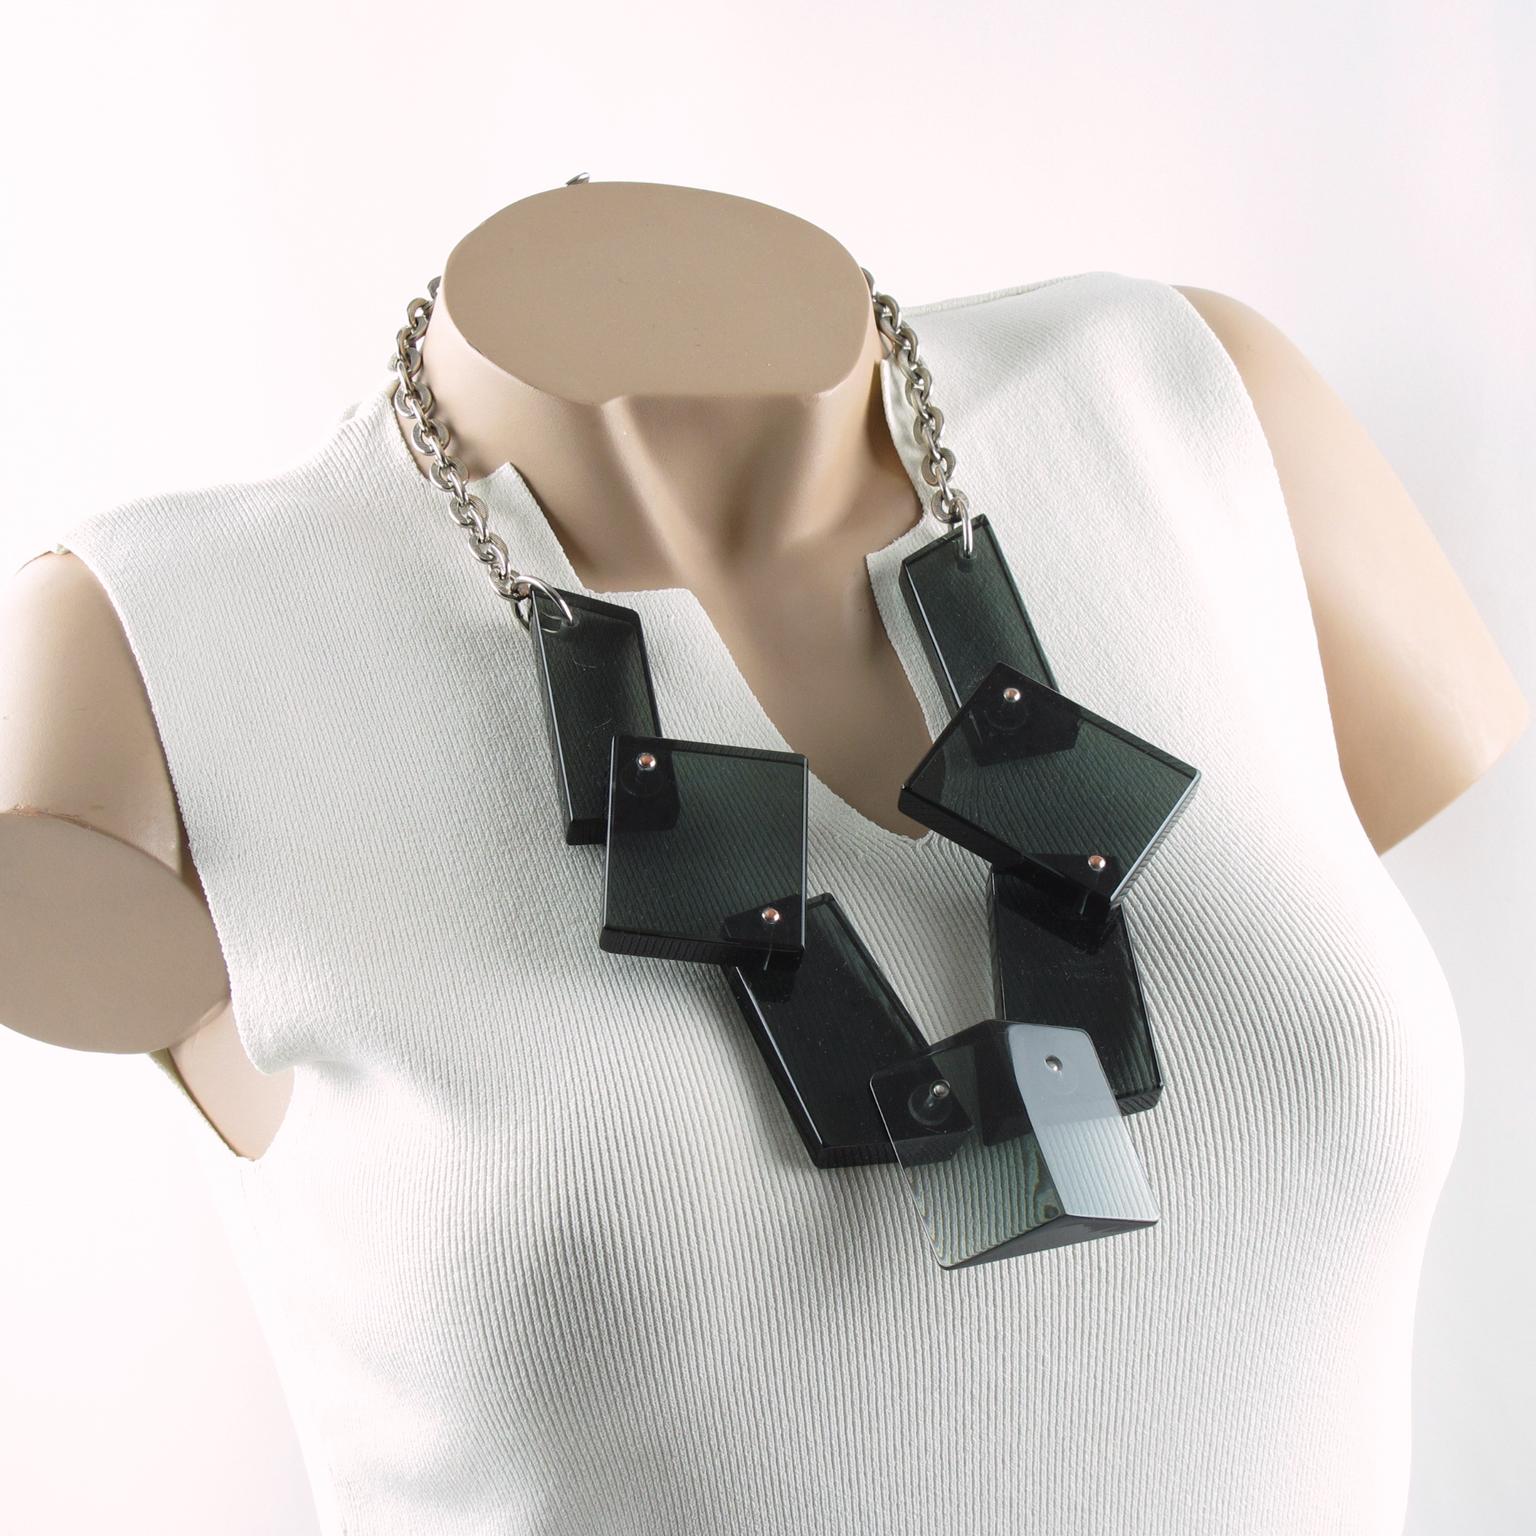 This stunning modernist bib features a modern handmade geometric choker necklace. Each extra-thick block of Lucite or Plexiglass is hinged, allowing the elements to move with the wearer's movements. The piece boasts a lovely transparent smoke